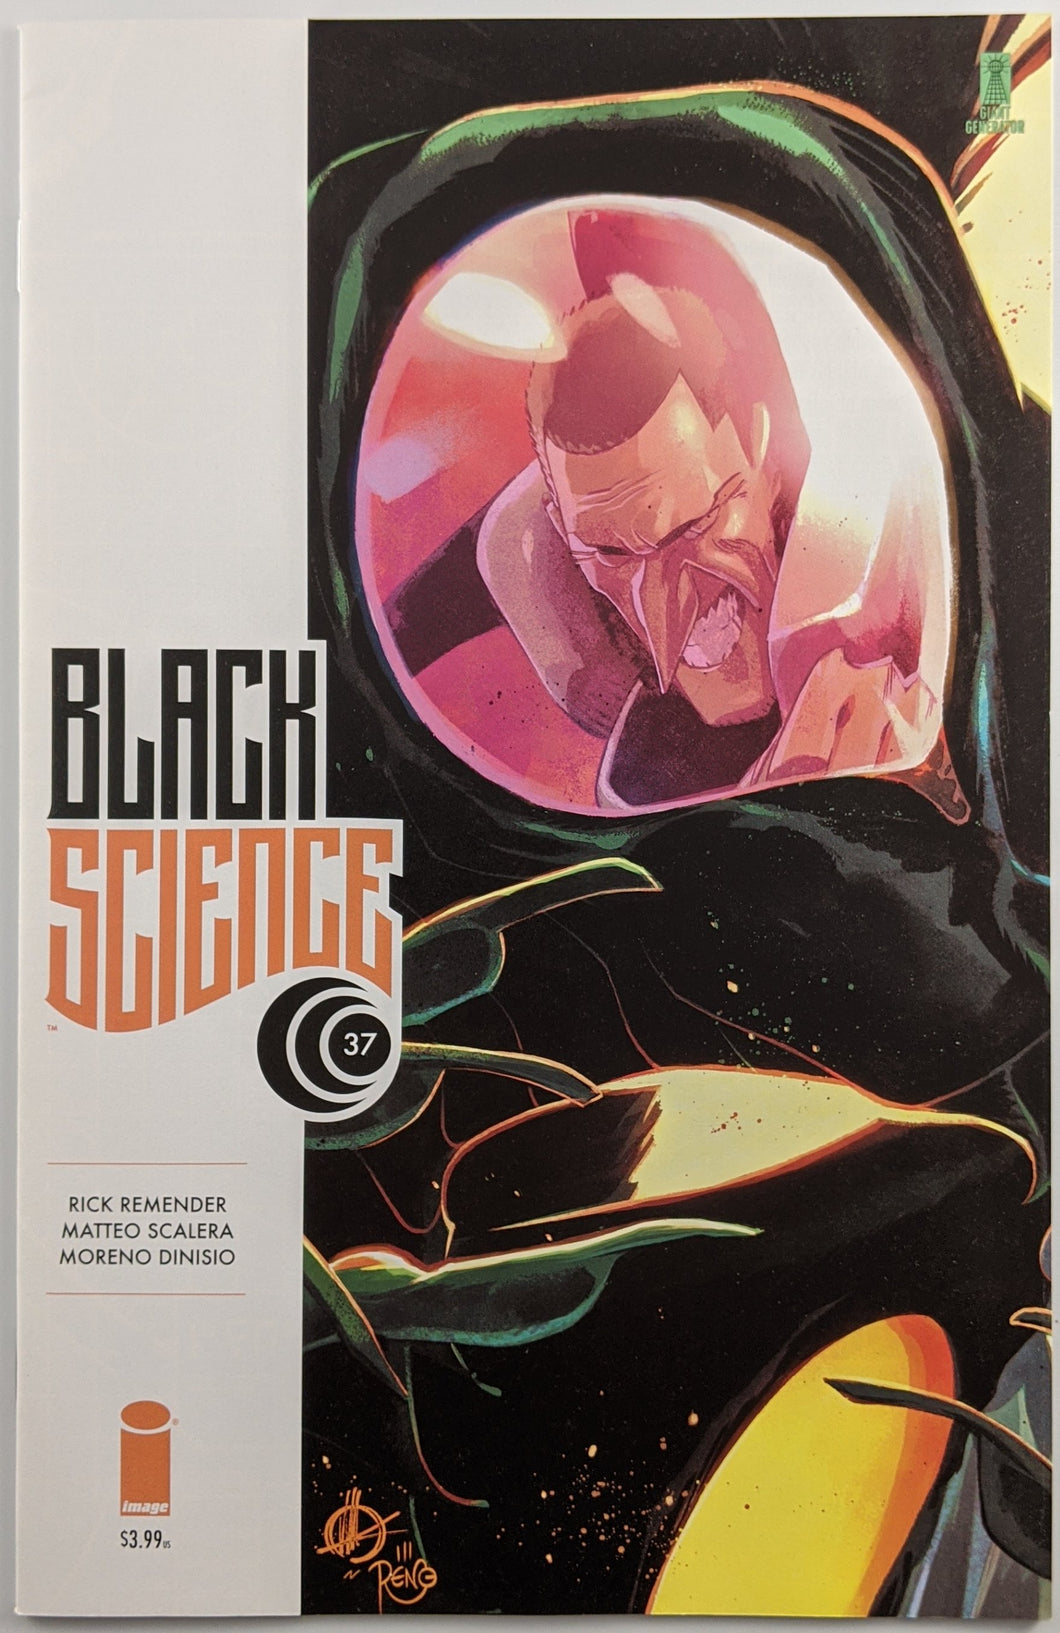 Black Science (2013) #37 (Cover A)